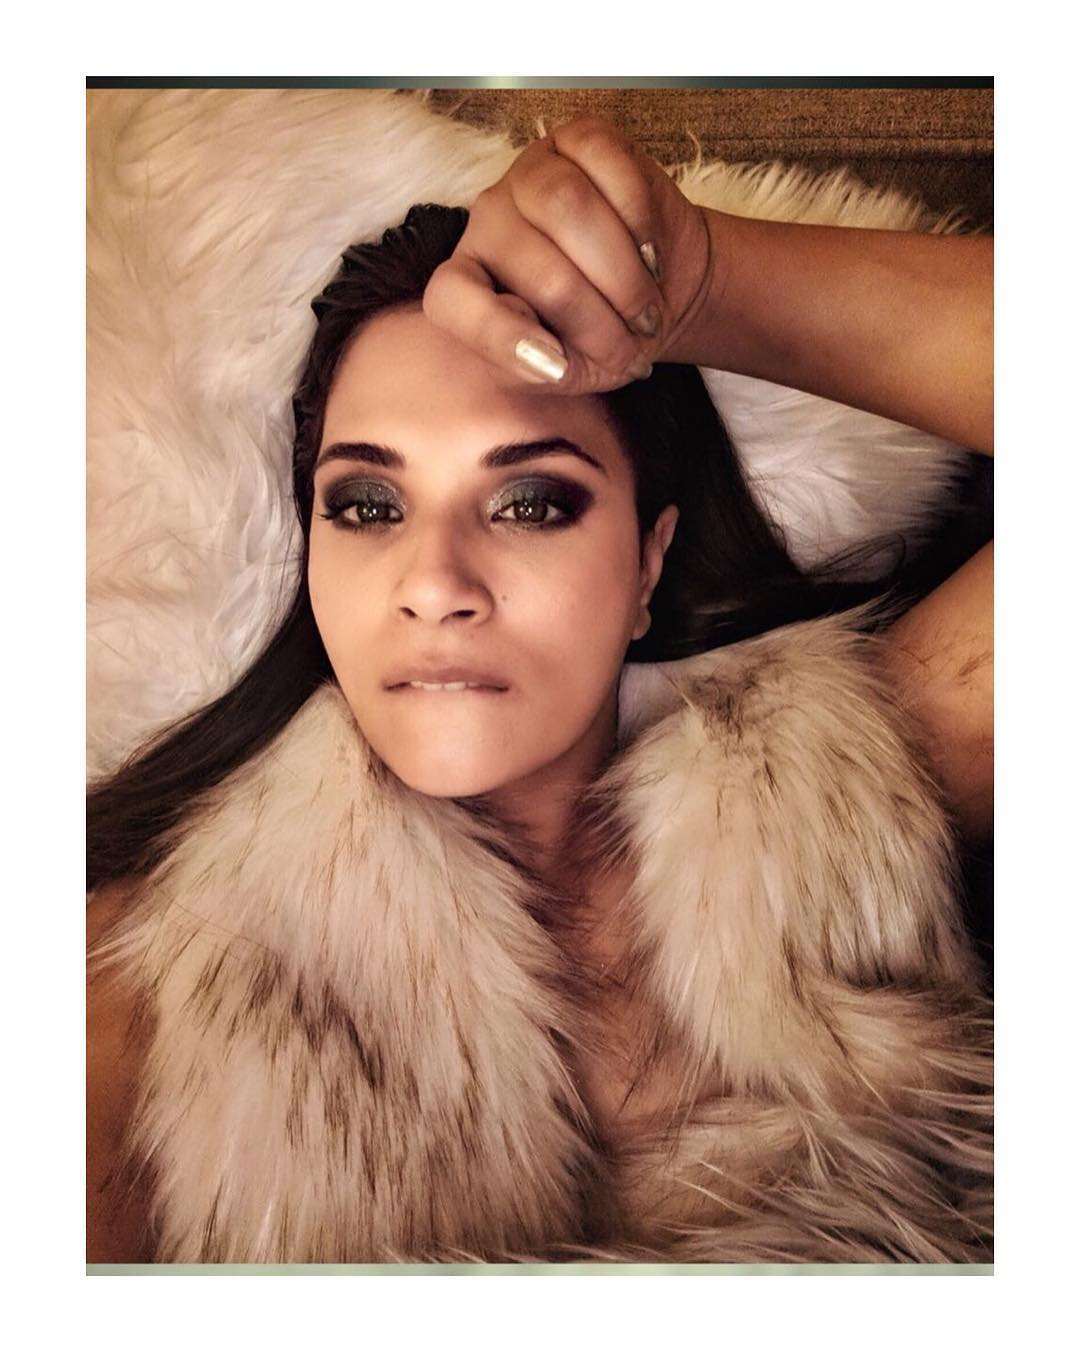 49 Hot Pictures Of Richa Chadha Which Will Make You Drool For Her | Best Of Comic Books